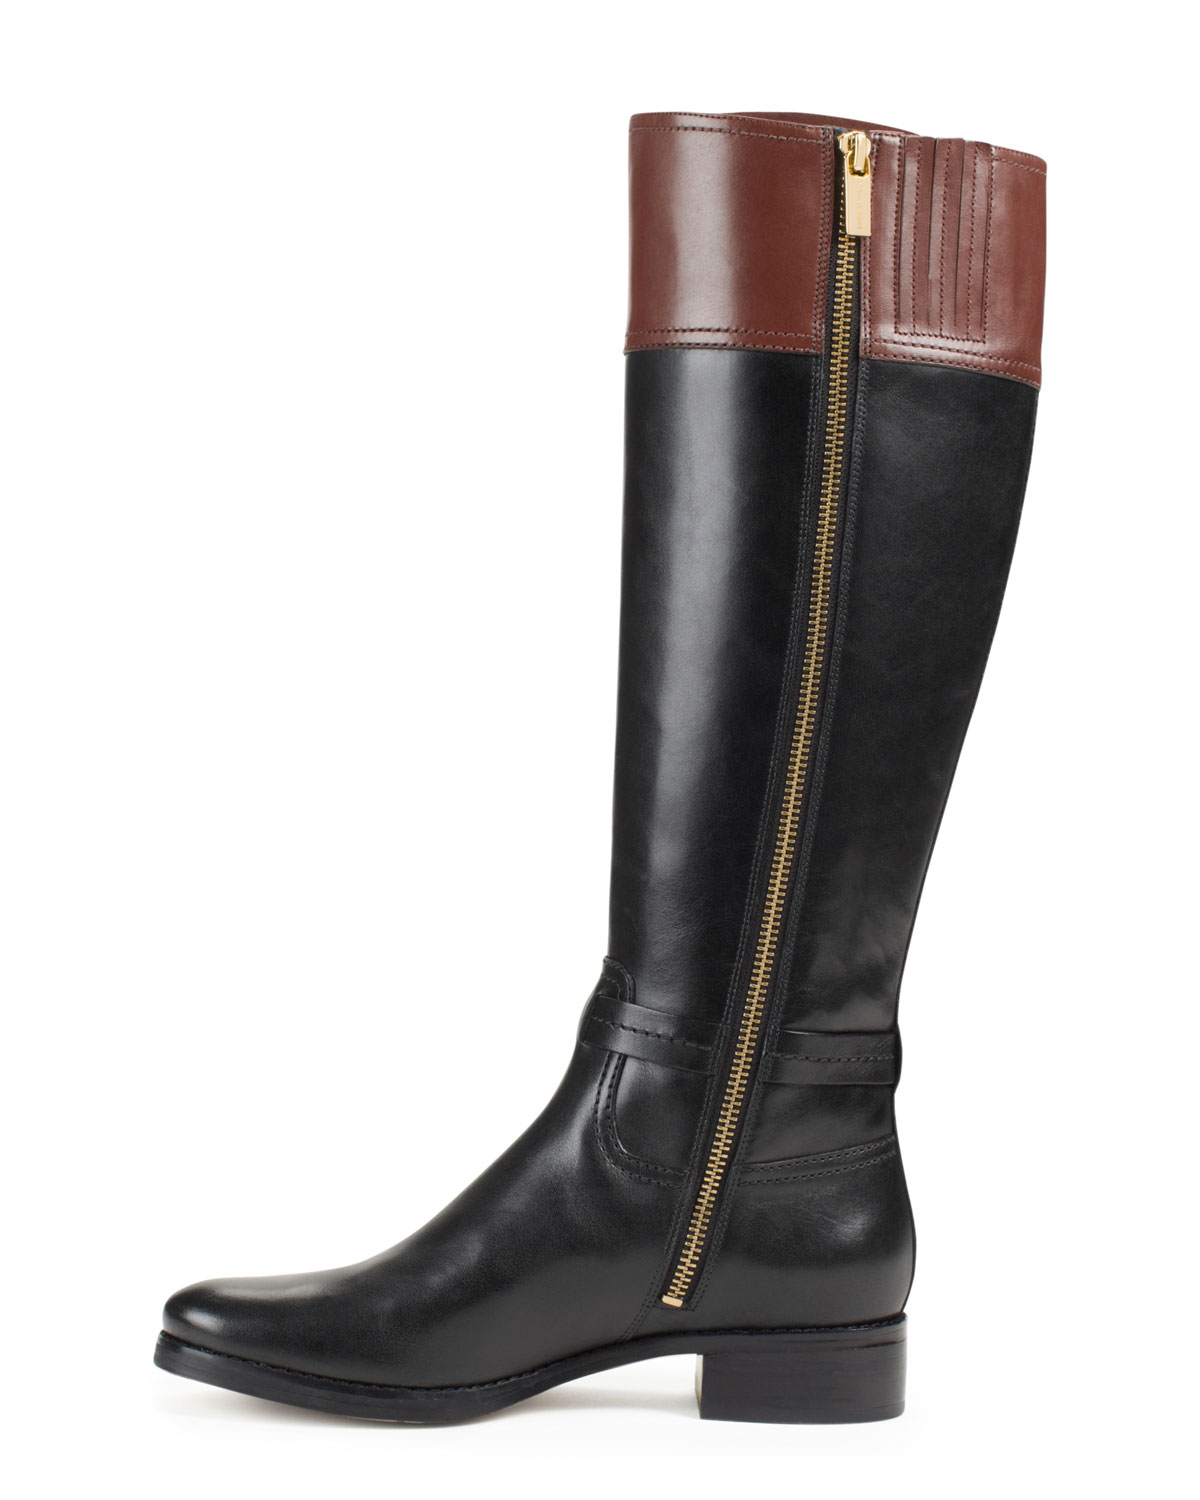 Michael Kors Michael Stockard Twotone Leather Riding Boot in Black - Lyst